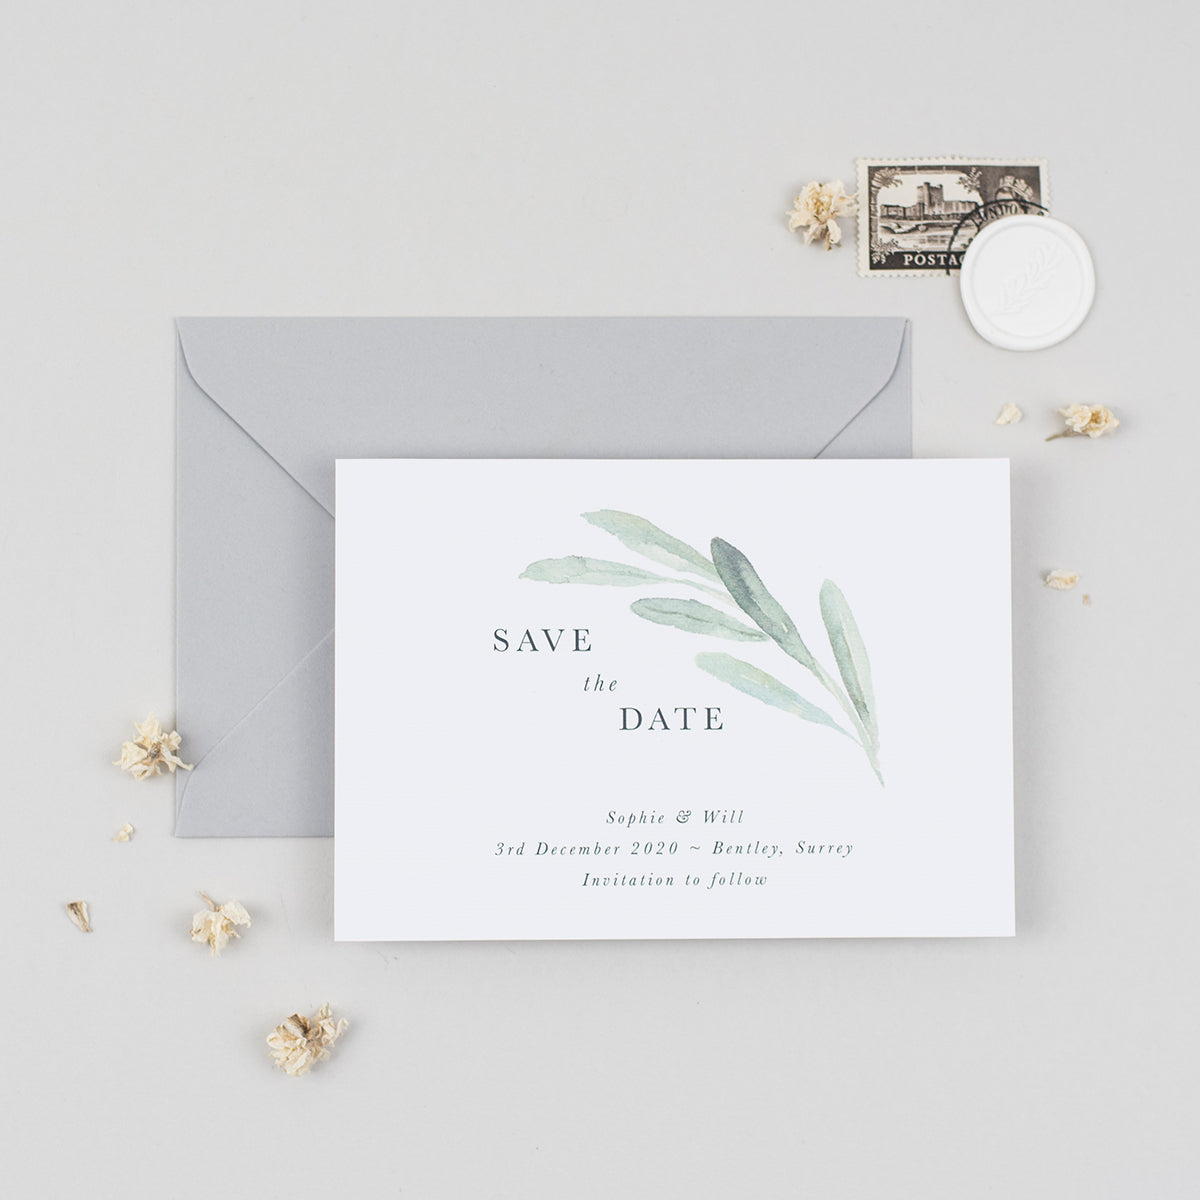 Olive Save the Date